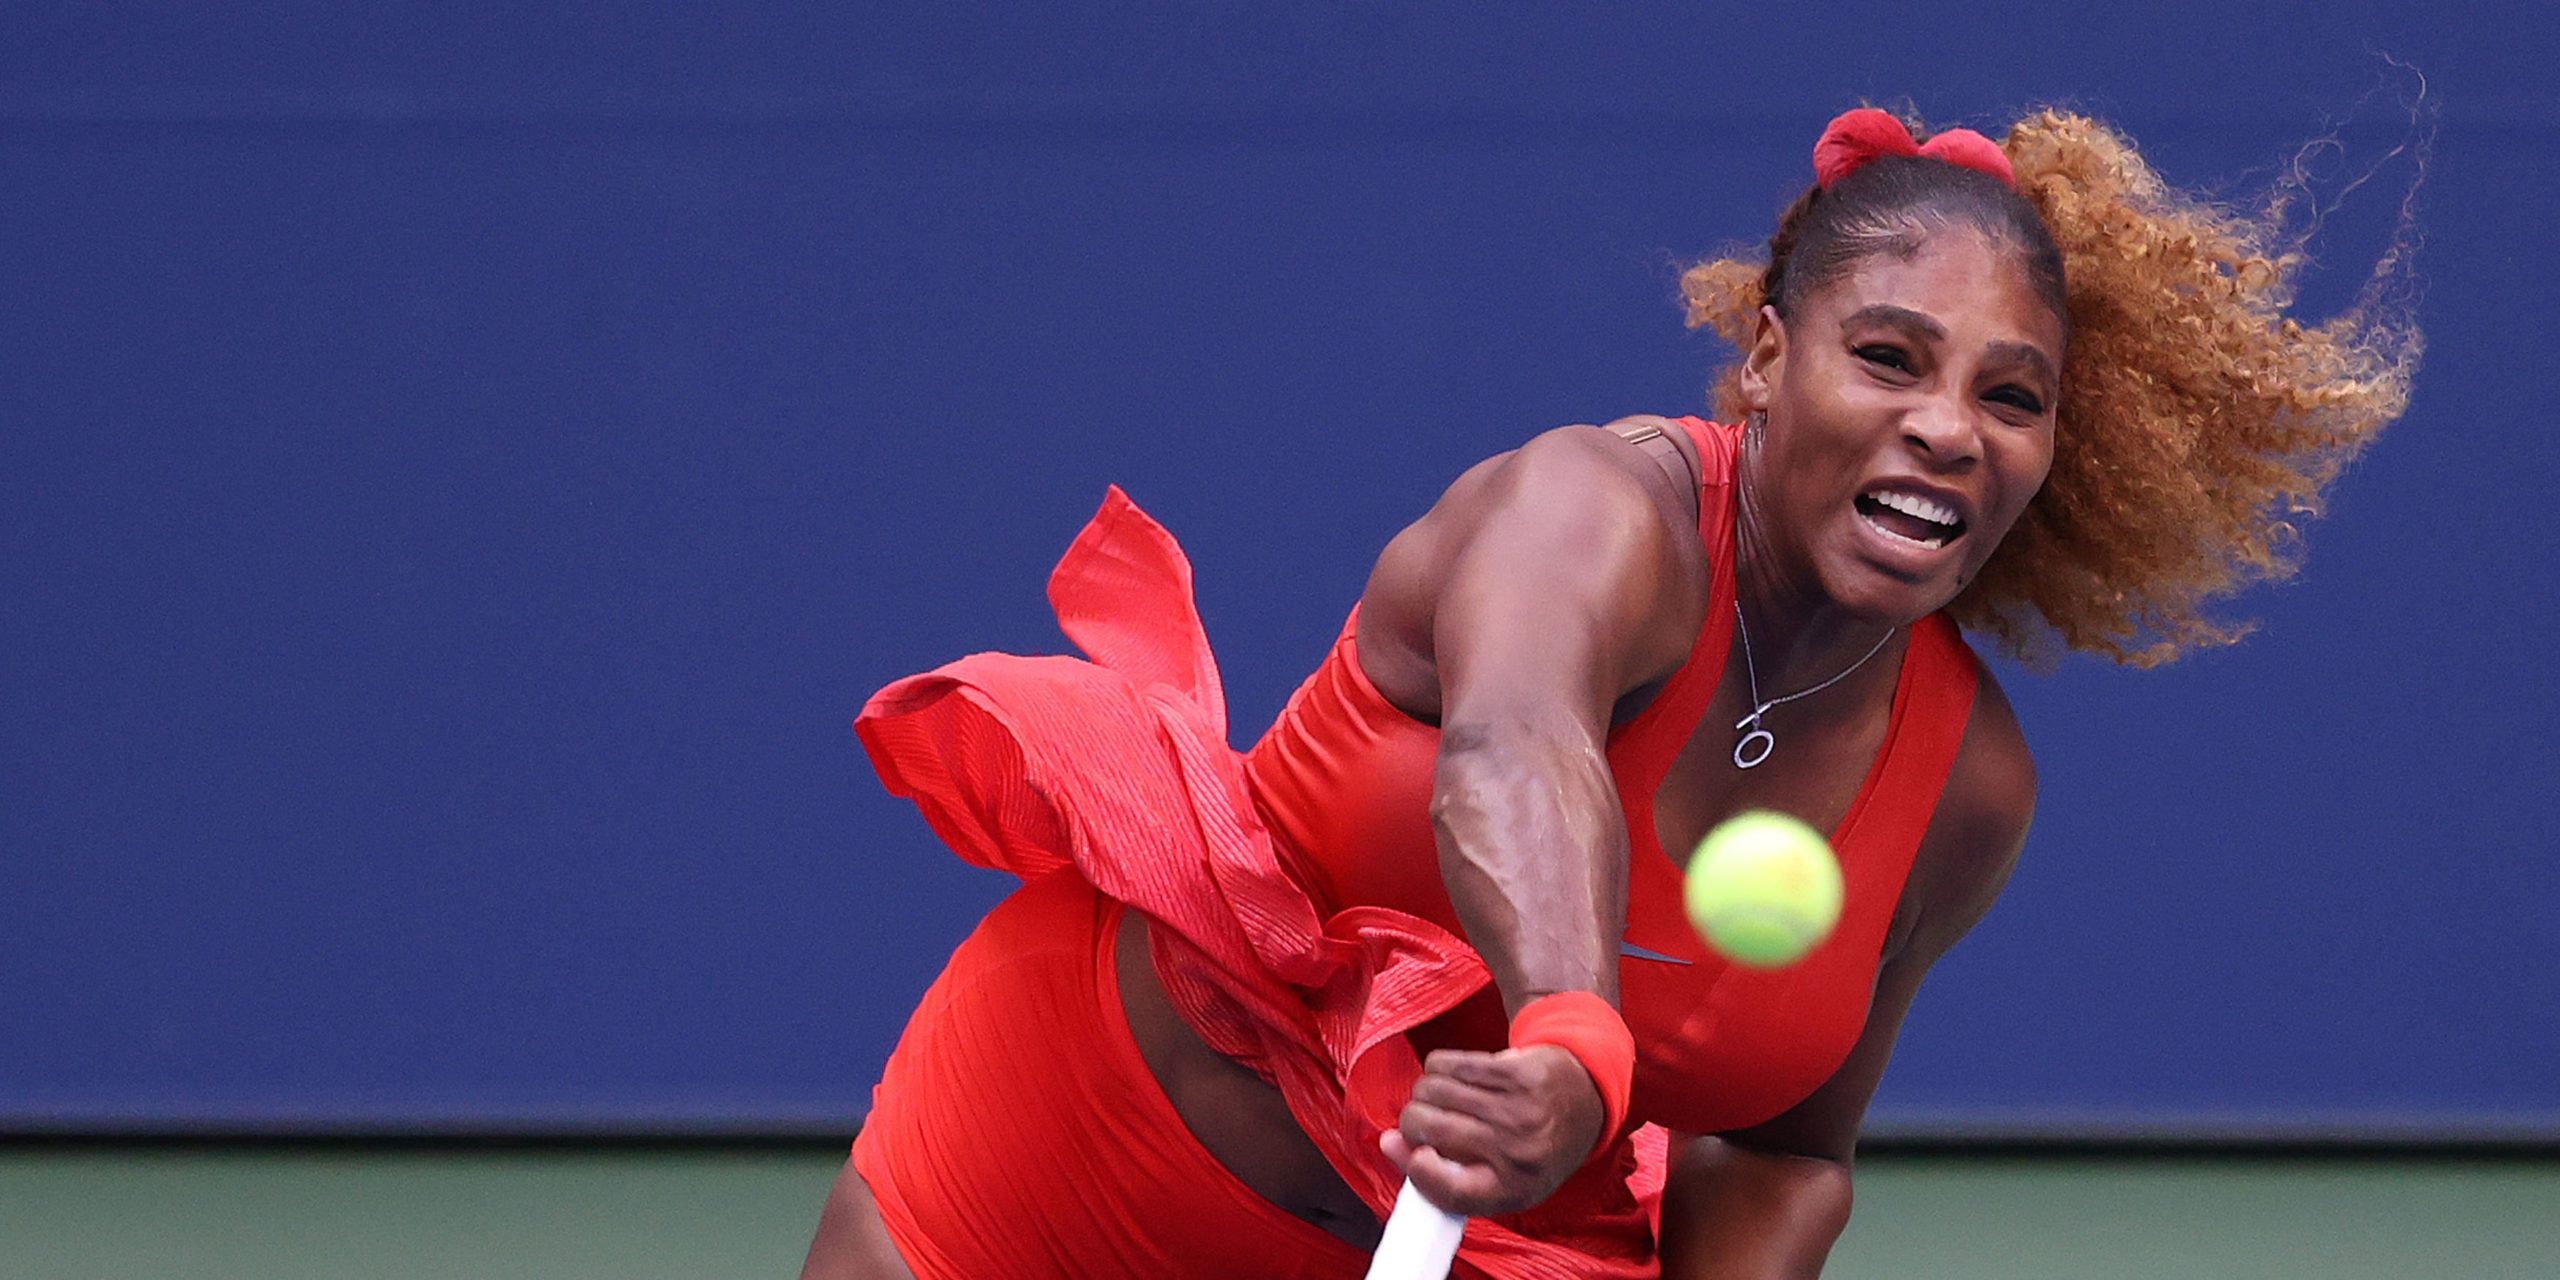 Serena Williams Matched Her Hair Scrunchies to Her Tennis Outfits at the U.S. Open — See the Photos